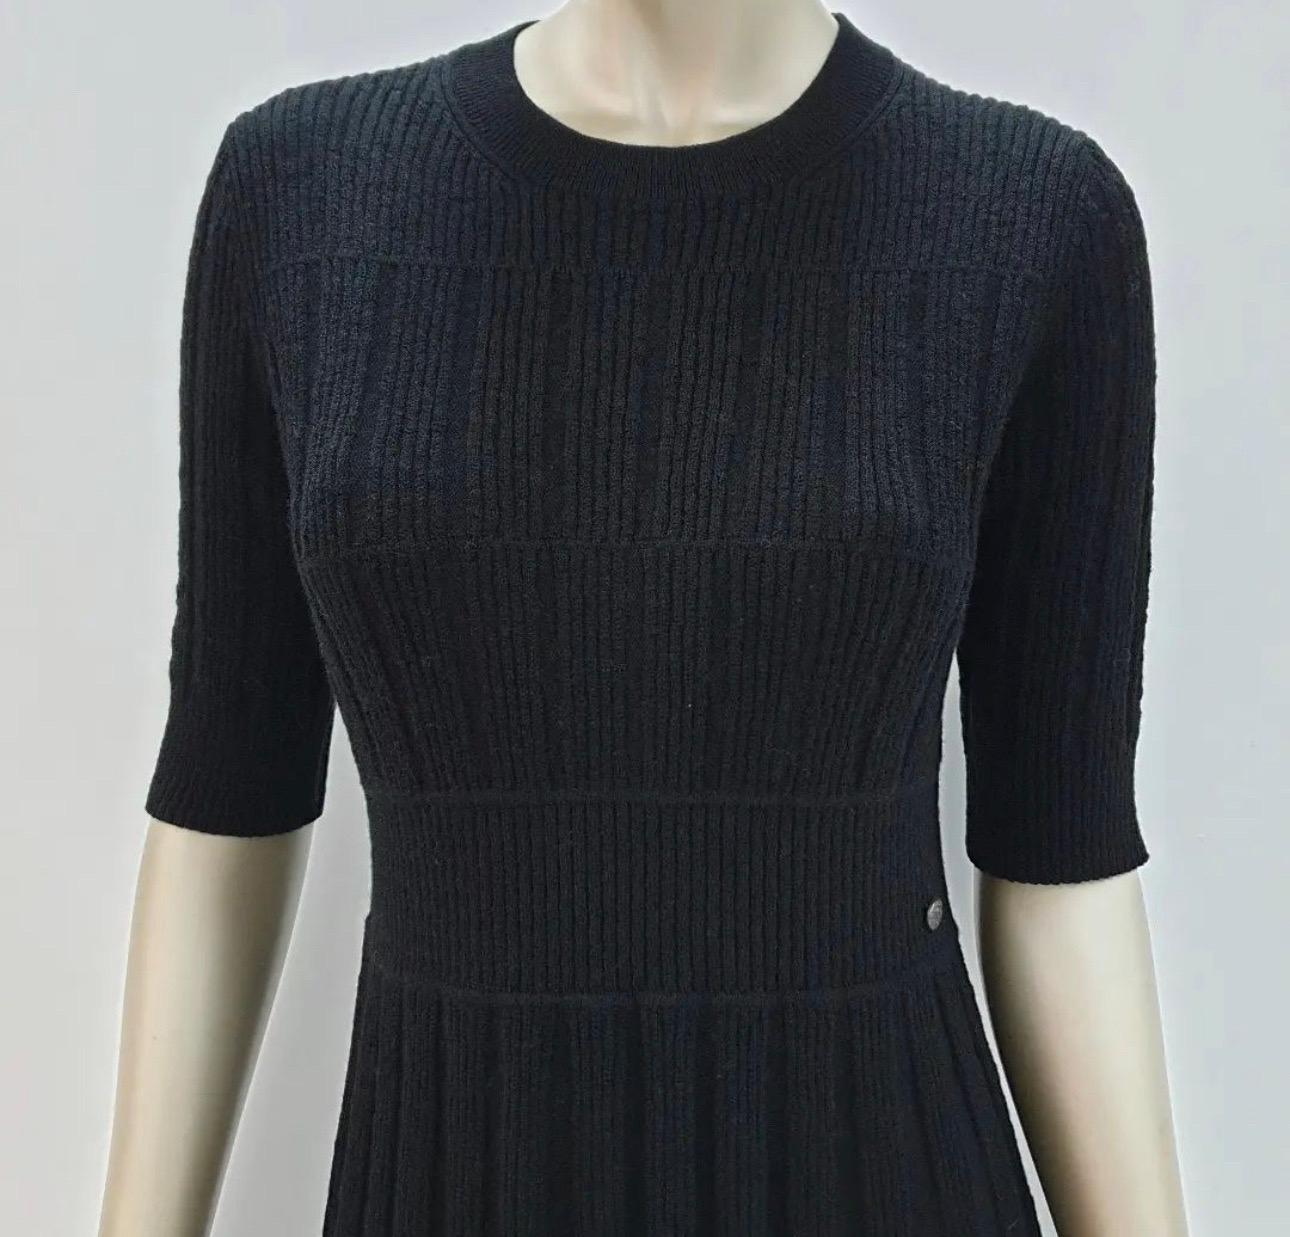 Chanel 2019 Wool Alpaca Dress In Excellent Condition For Sale In Krakow, PL